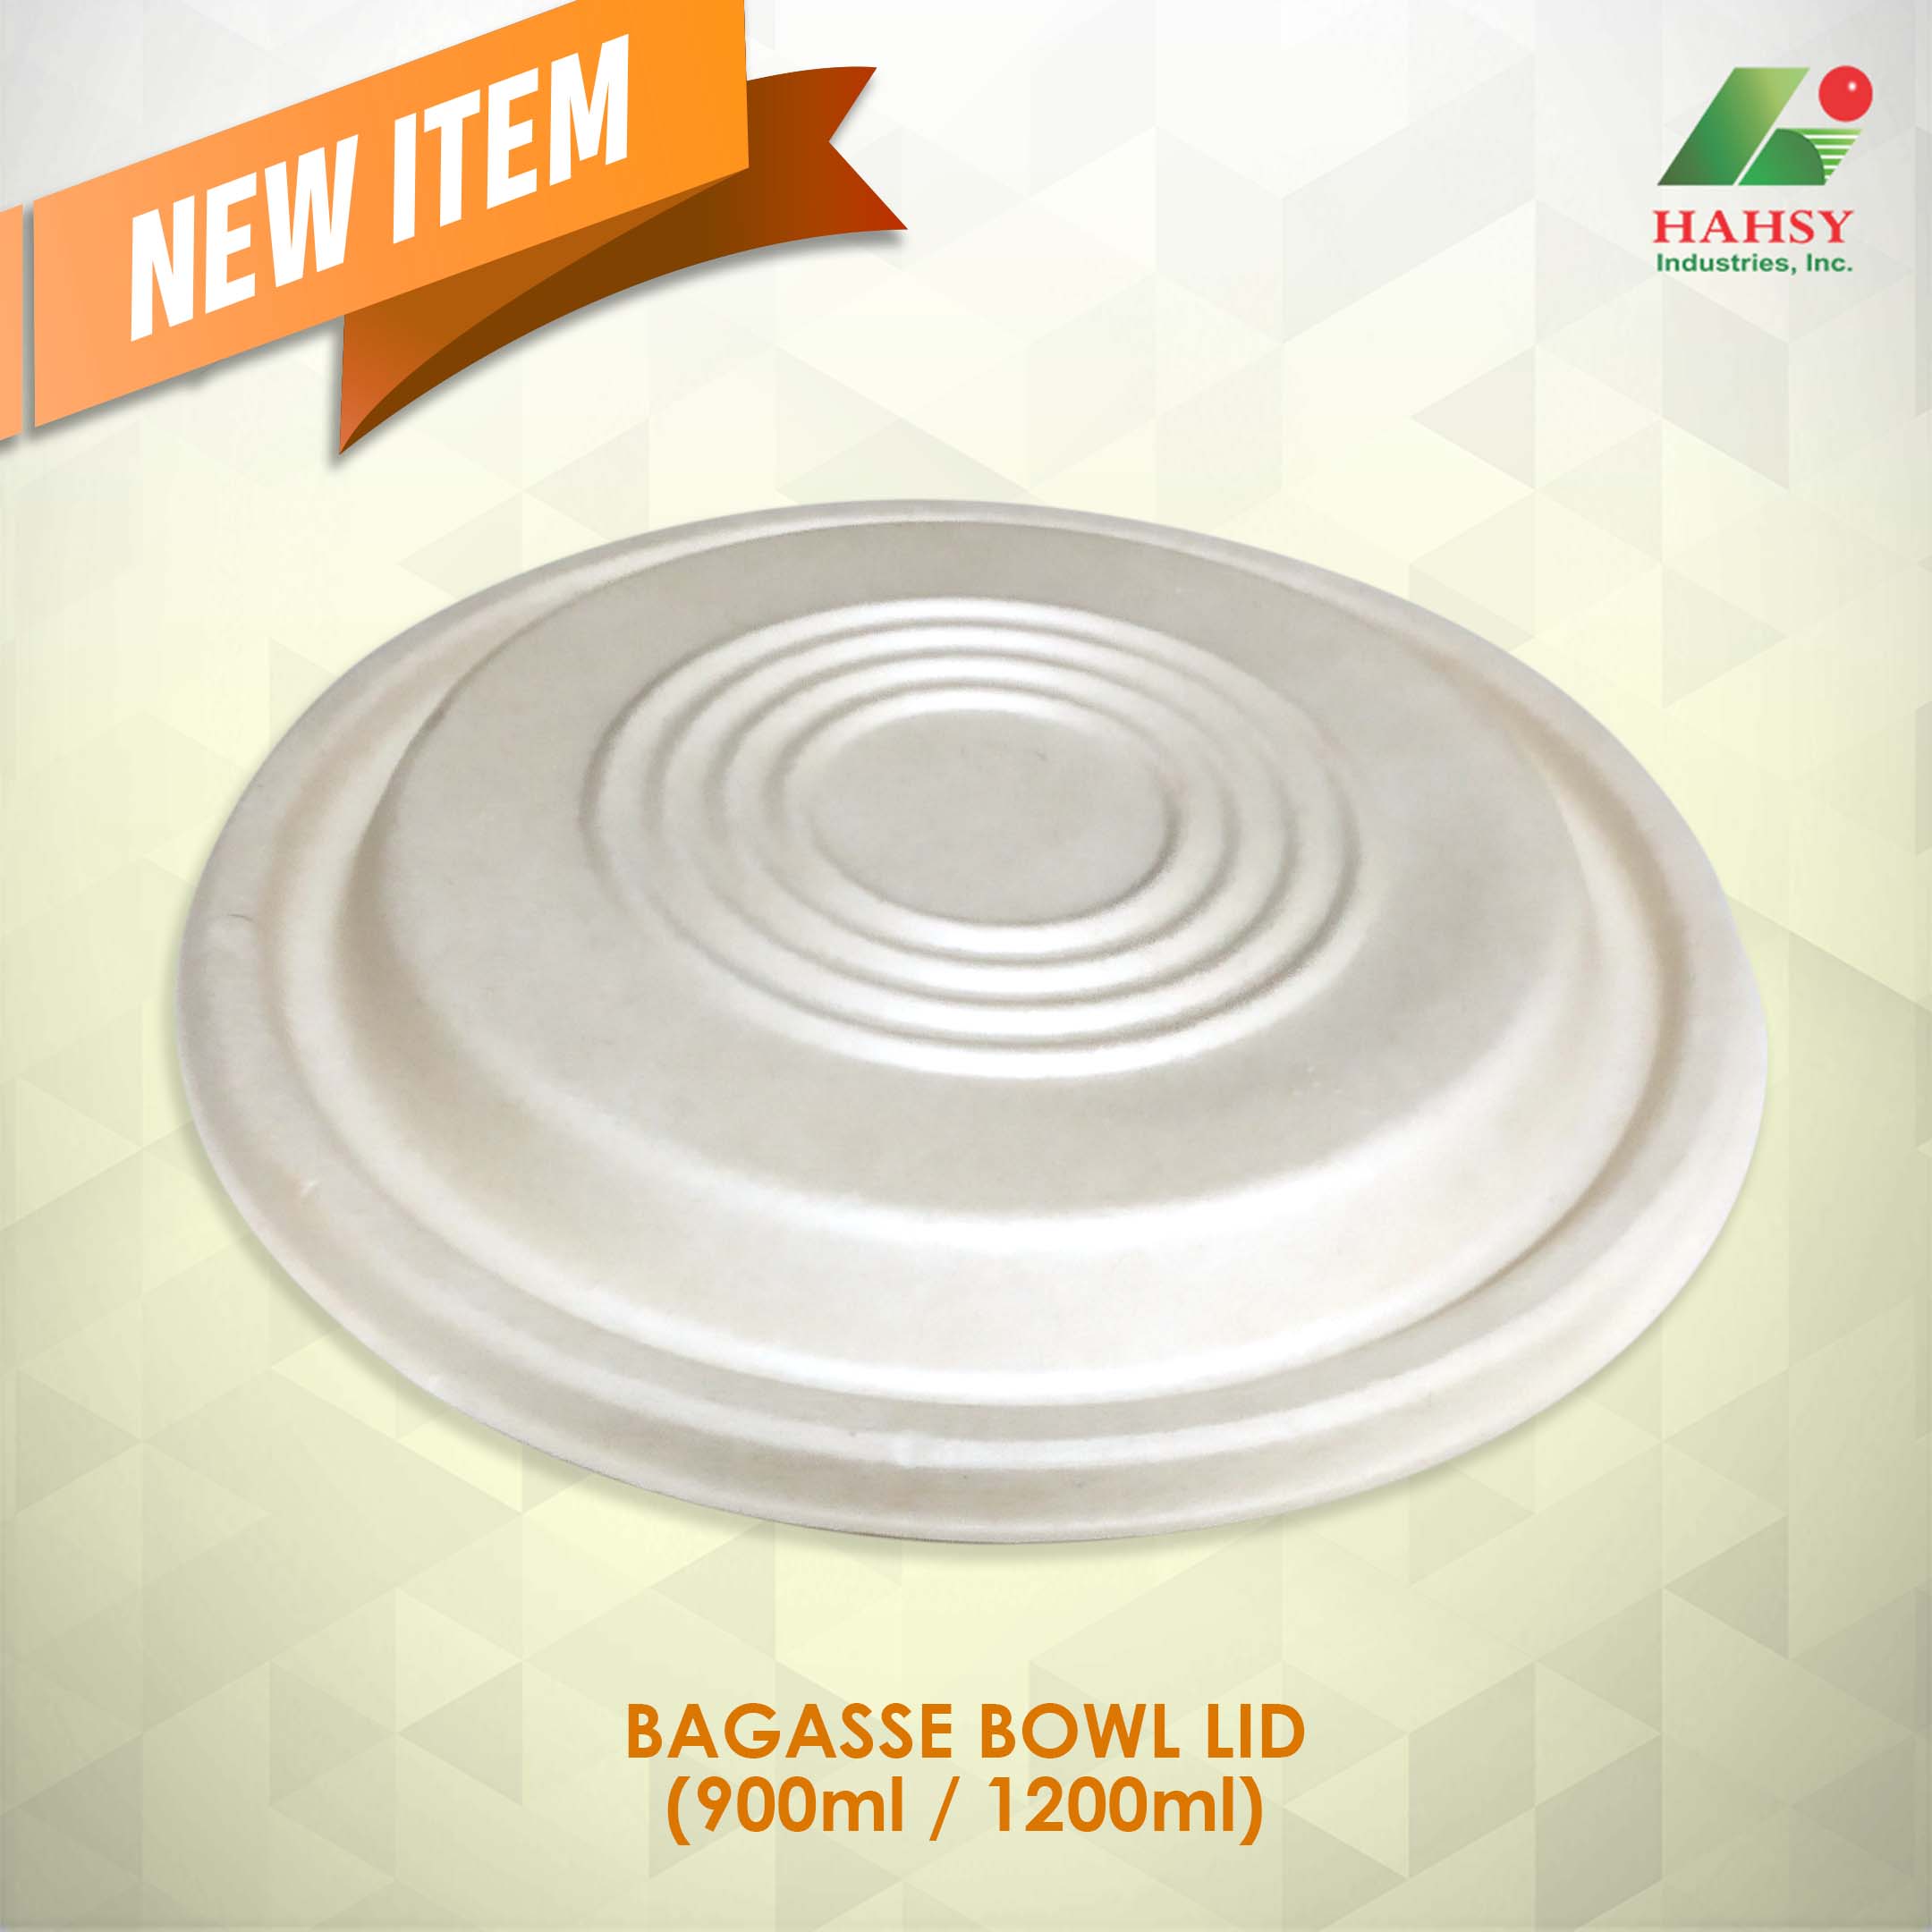 Sugarcane Bagasse bowl lid for 900ml and 1200ml